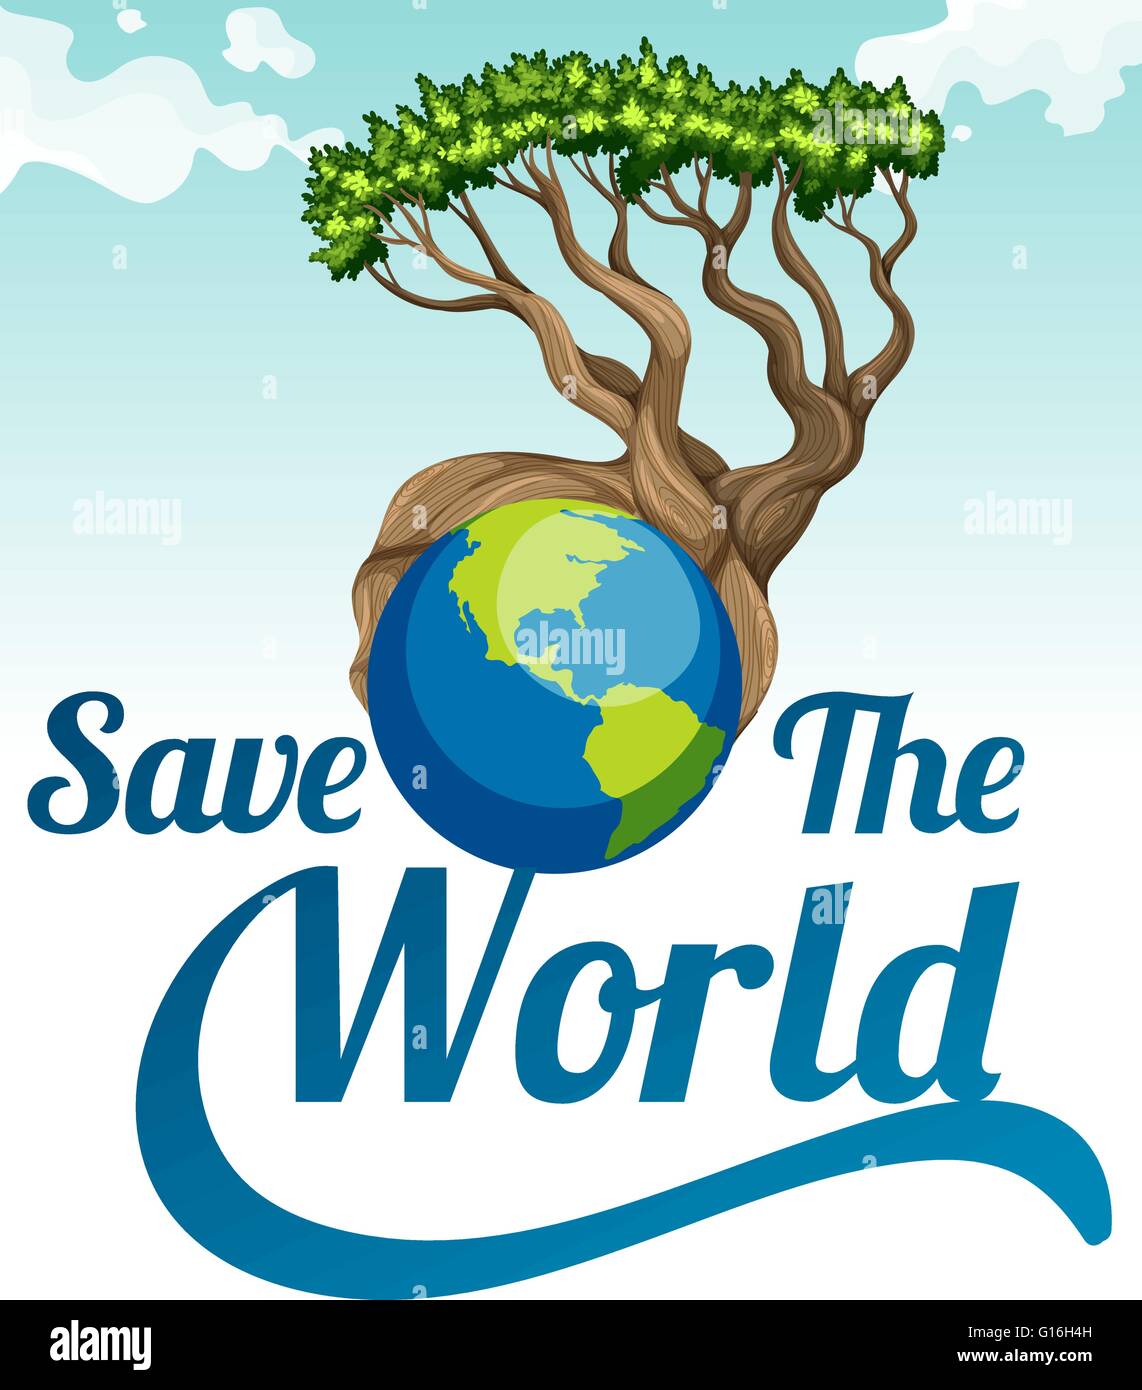 Save The World Poster With Earth And Tree Illustration Stock Vector